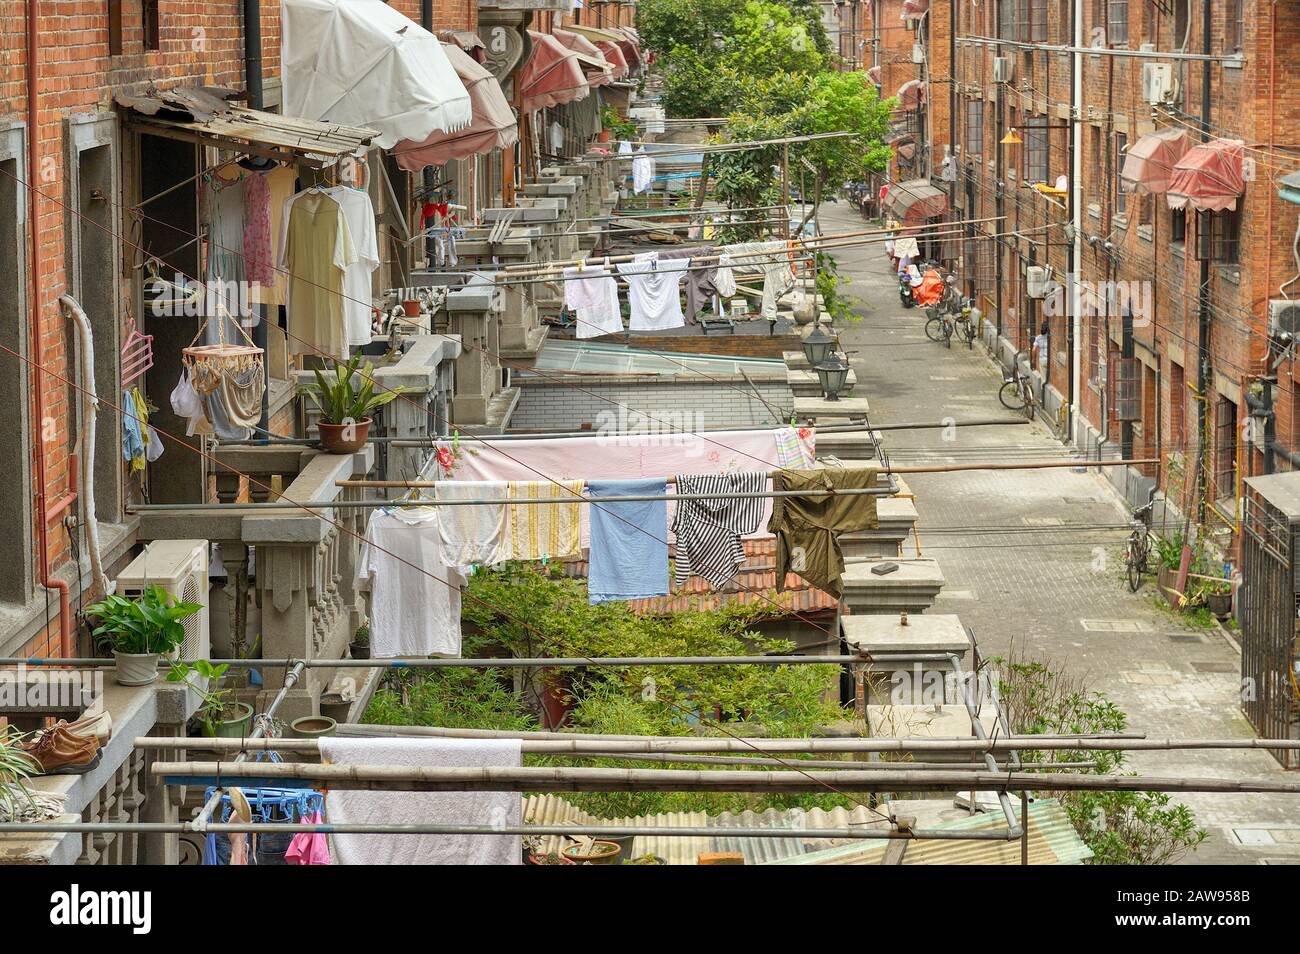 Typical, picturesque French concession quarter in old Shanghai, with hanging drying clothes and brick buildings. Stock Photo